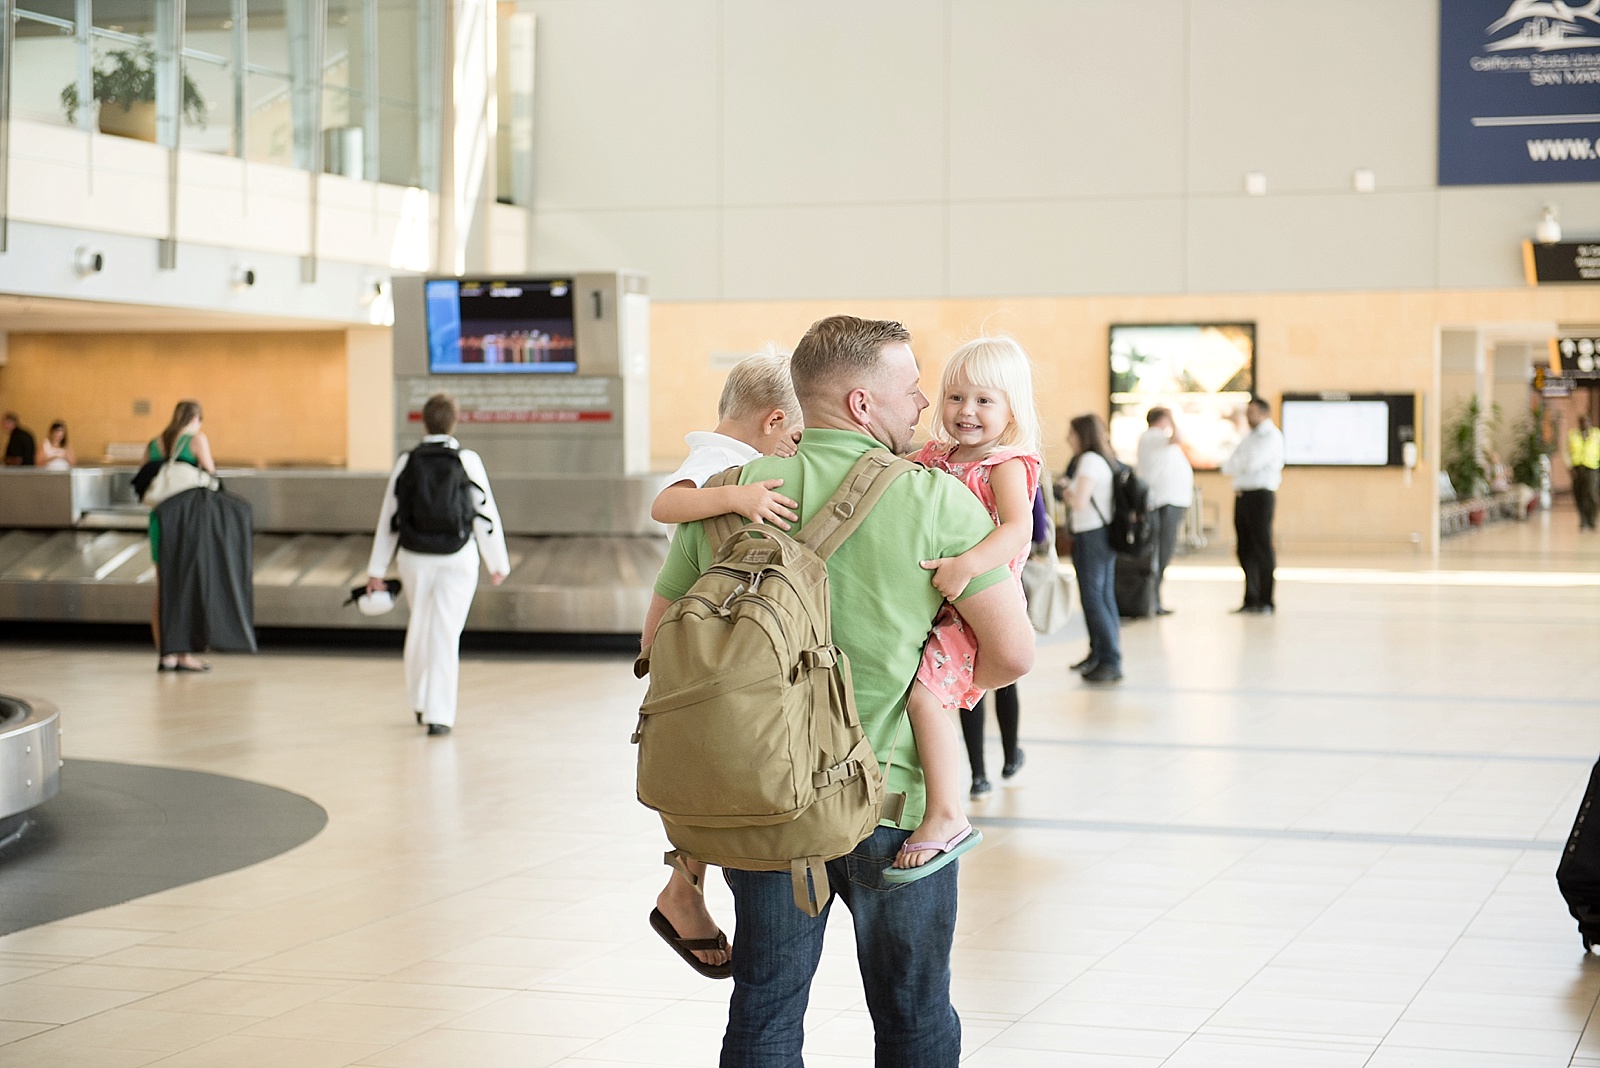 Military deployment Homecoming photography at the San Diego Airport by Lauren Nygard